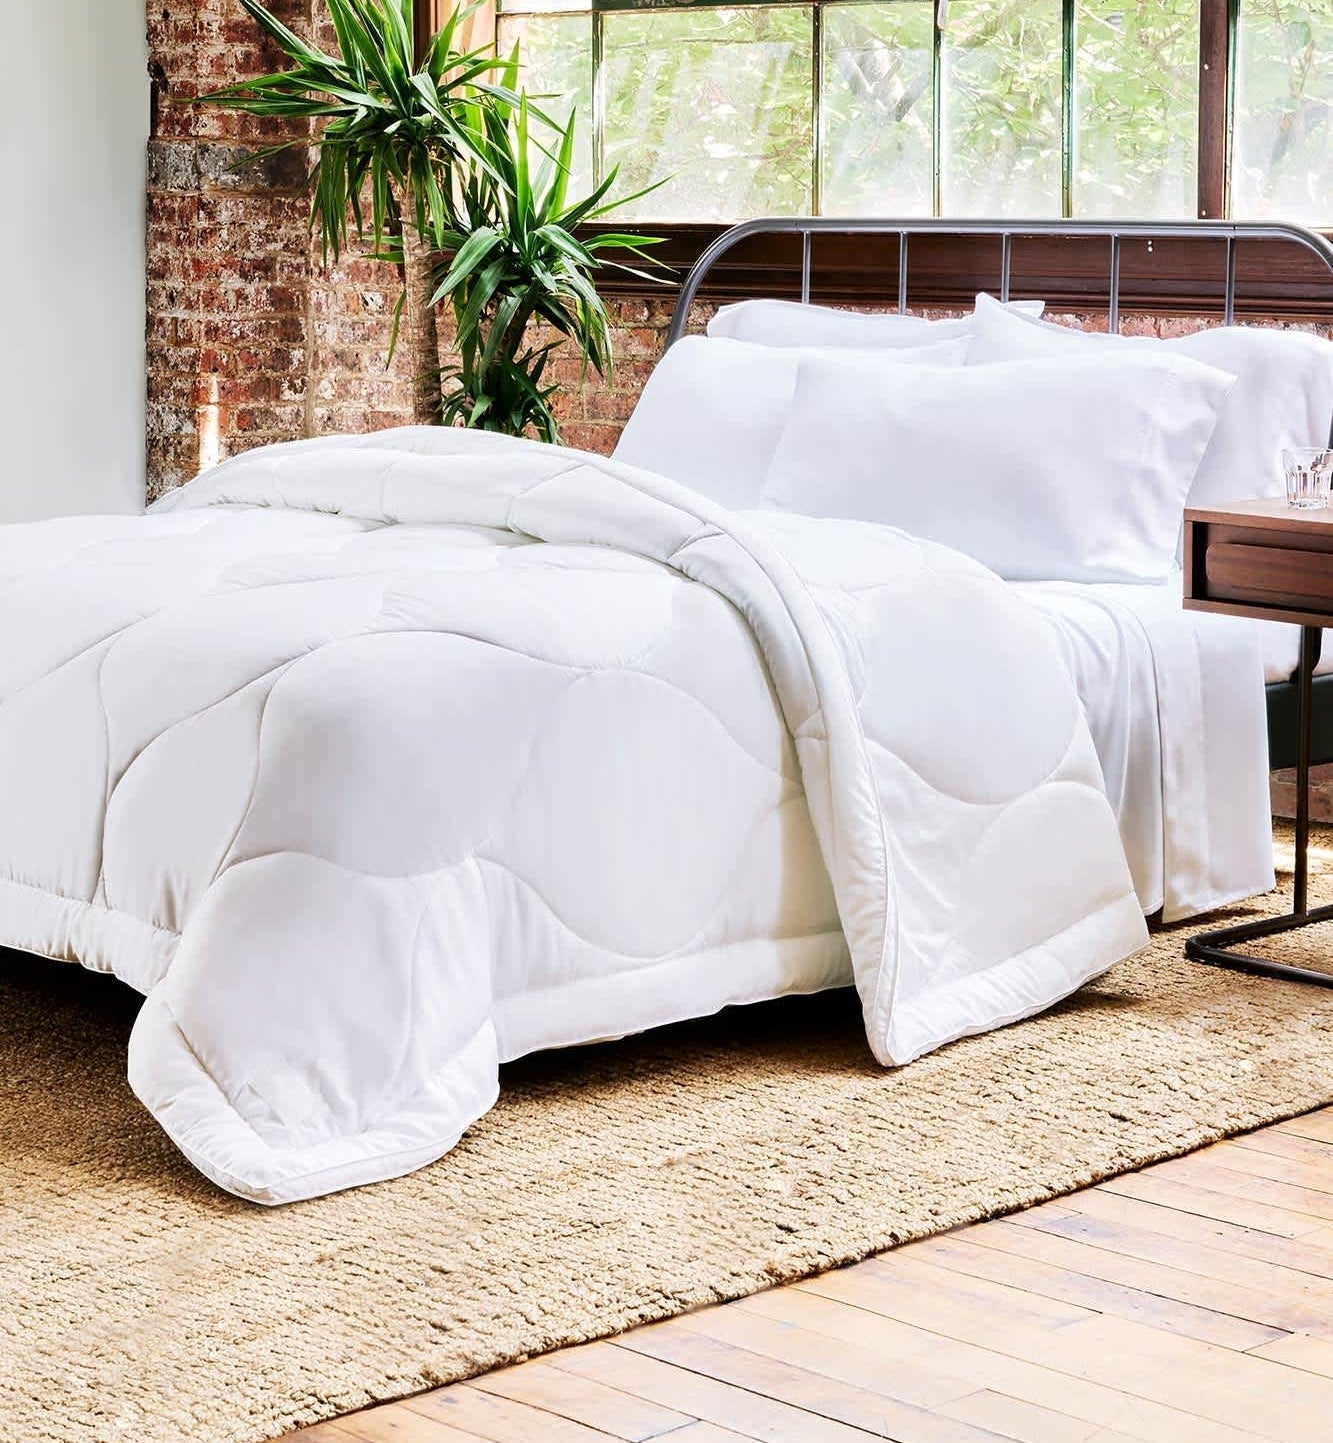 38 Products That’ll Make Your Home, Wardrobe, And Car More Comfortable Than Ever